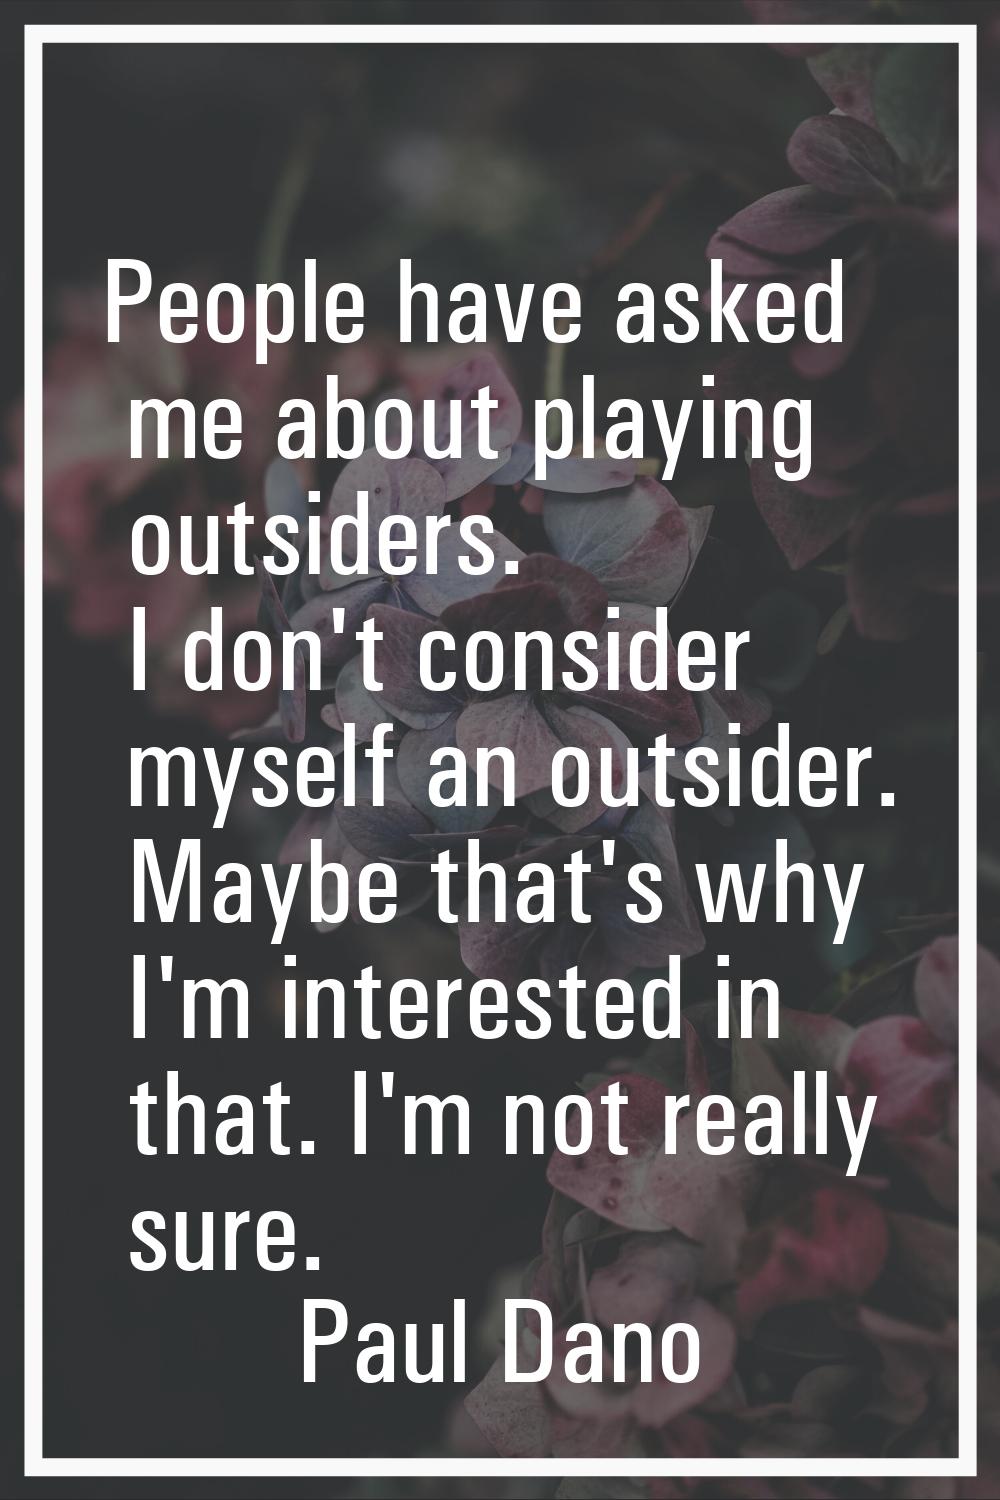 People have asked me about playing outsiders. I don't consider myself an outsider. Maybe that's why